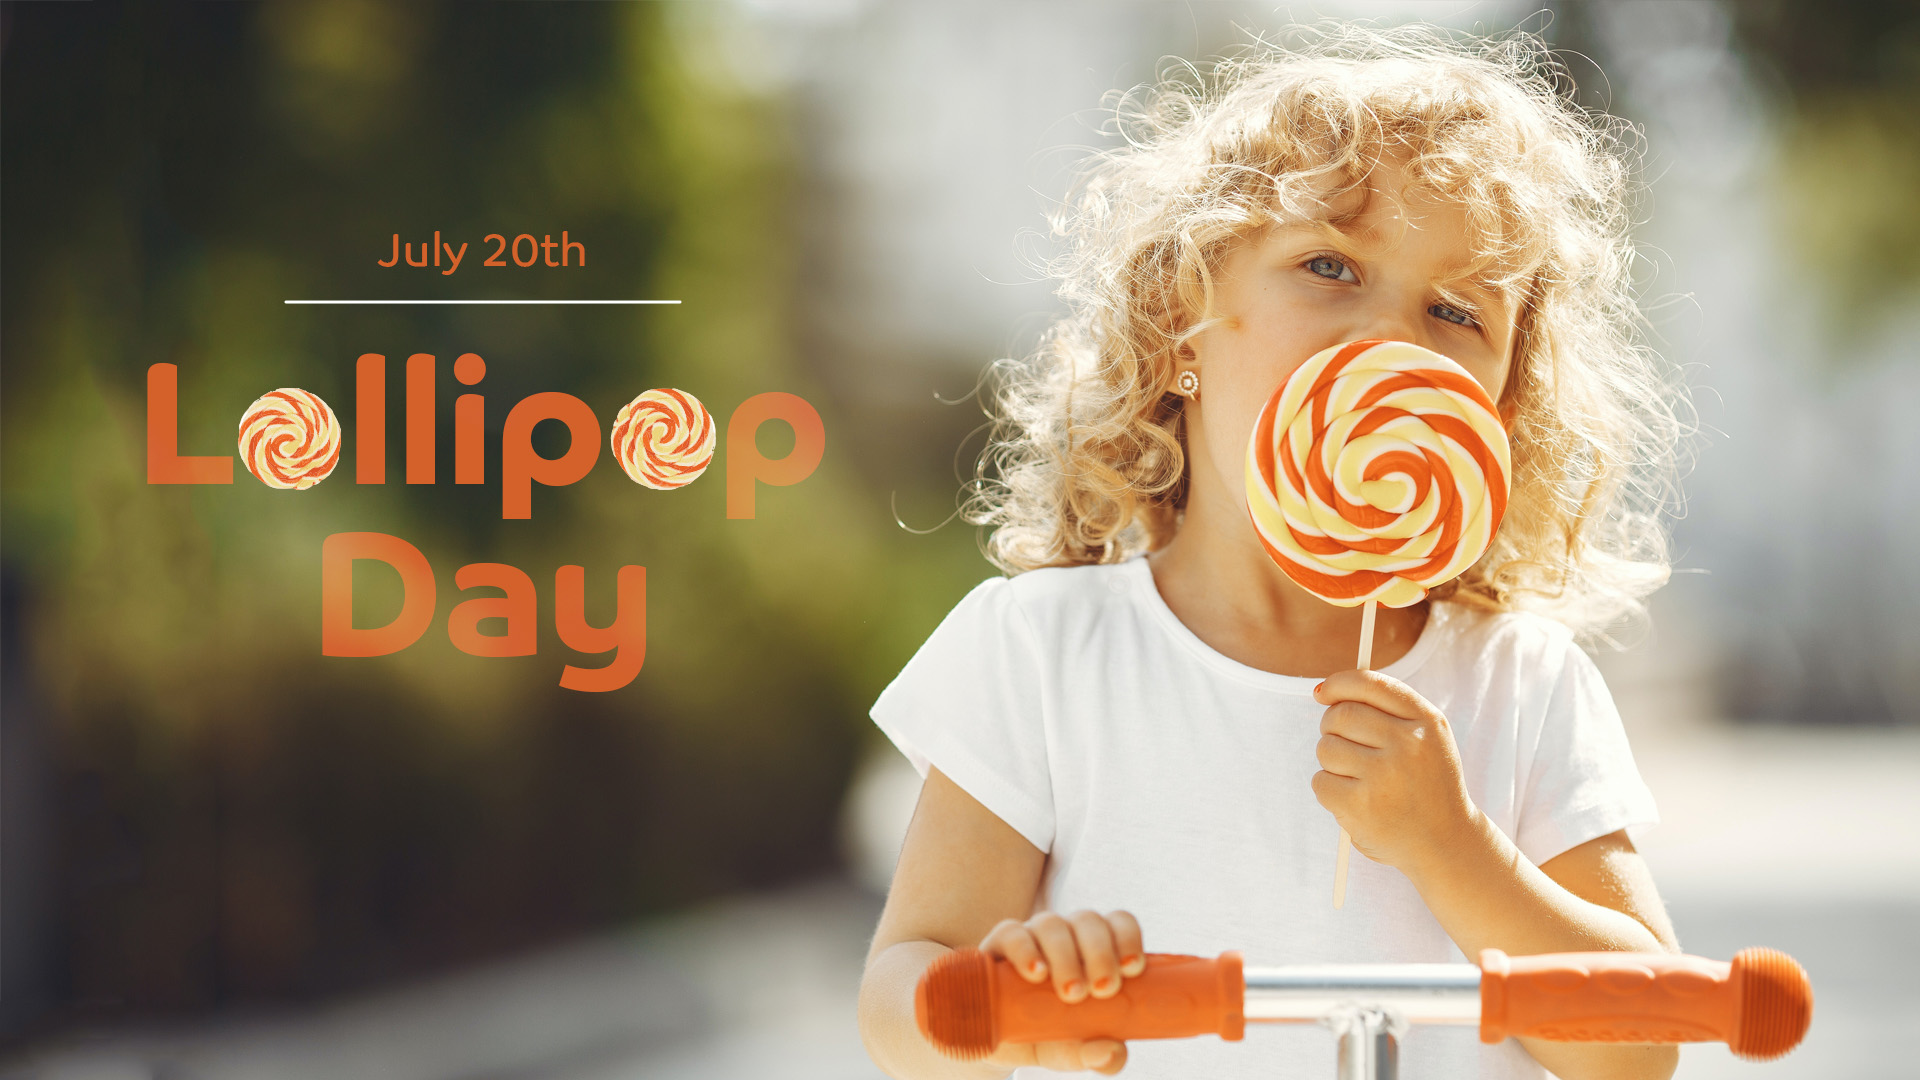 A photo of a blonde curly haired girl riding her red handled scooter licking a big orange, yellow, and white lollipop. On the left hand side of the photo there is orange text that reads July 20th [horizontal line] Lollipop Day.